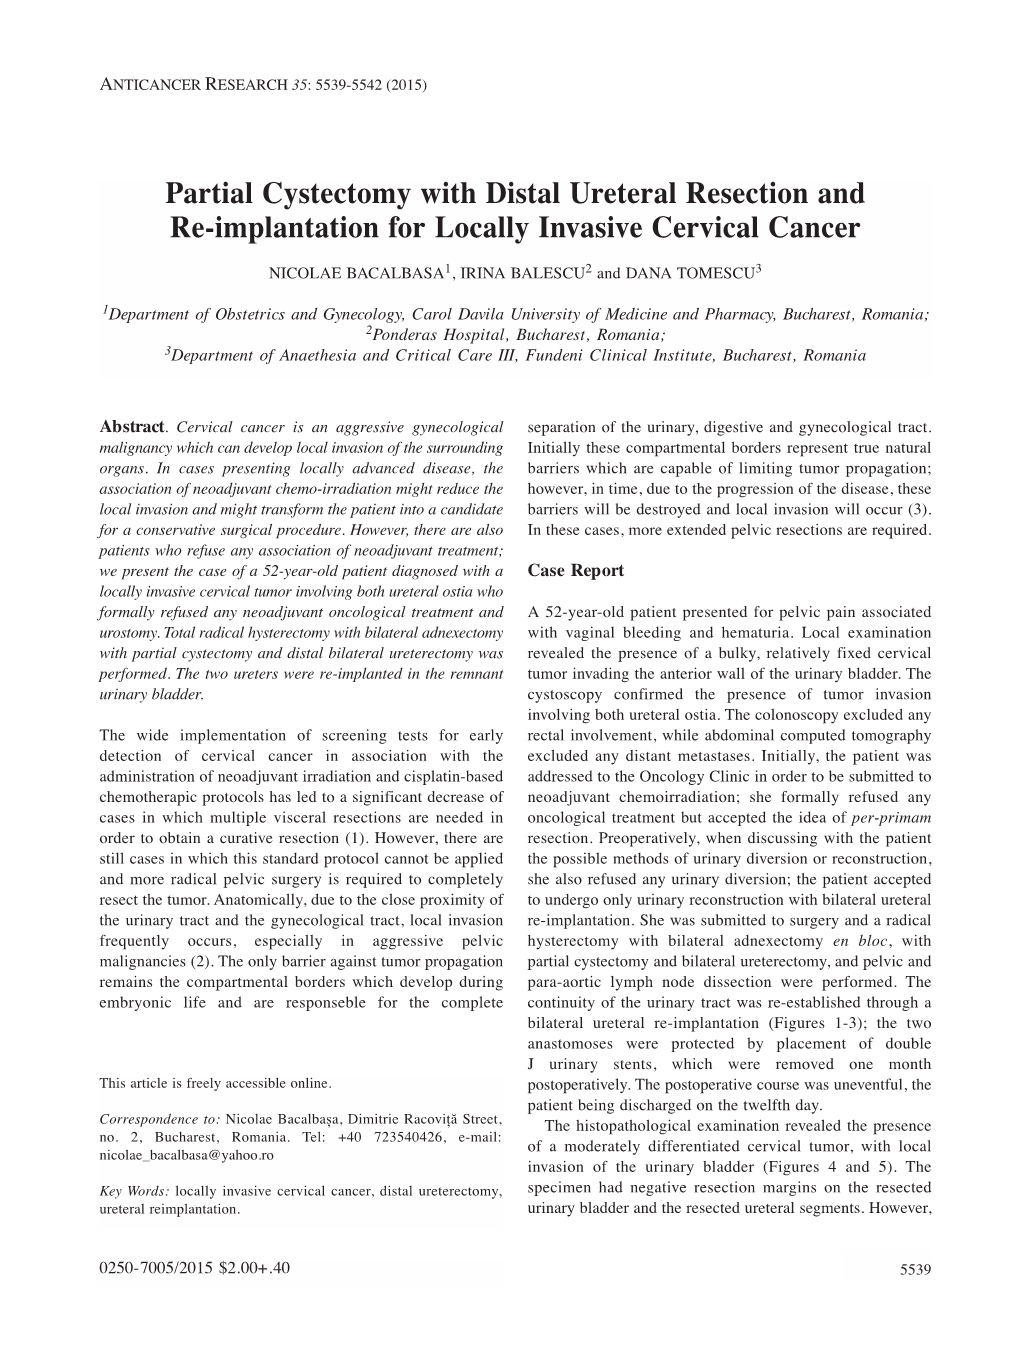 Partial Cystectomy with Distal Ureteral Resection and Re-Implantation for Locally Invasive Cervical Cancer